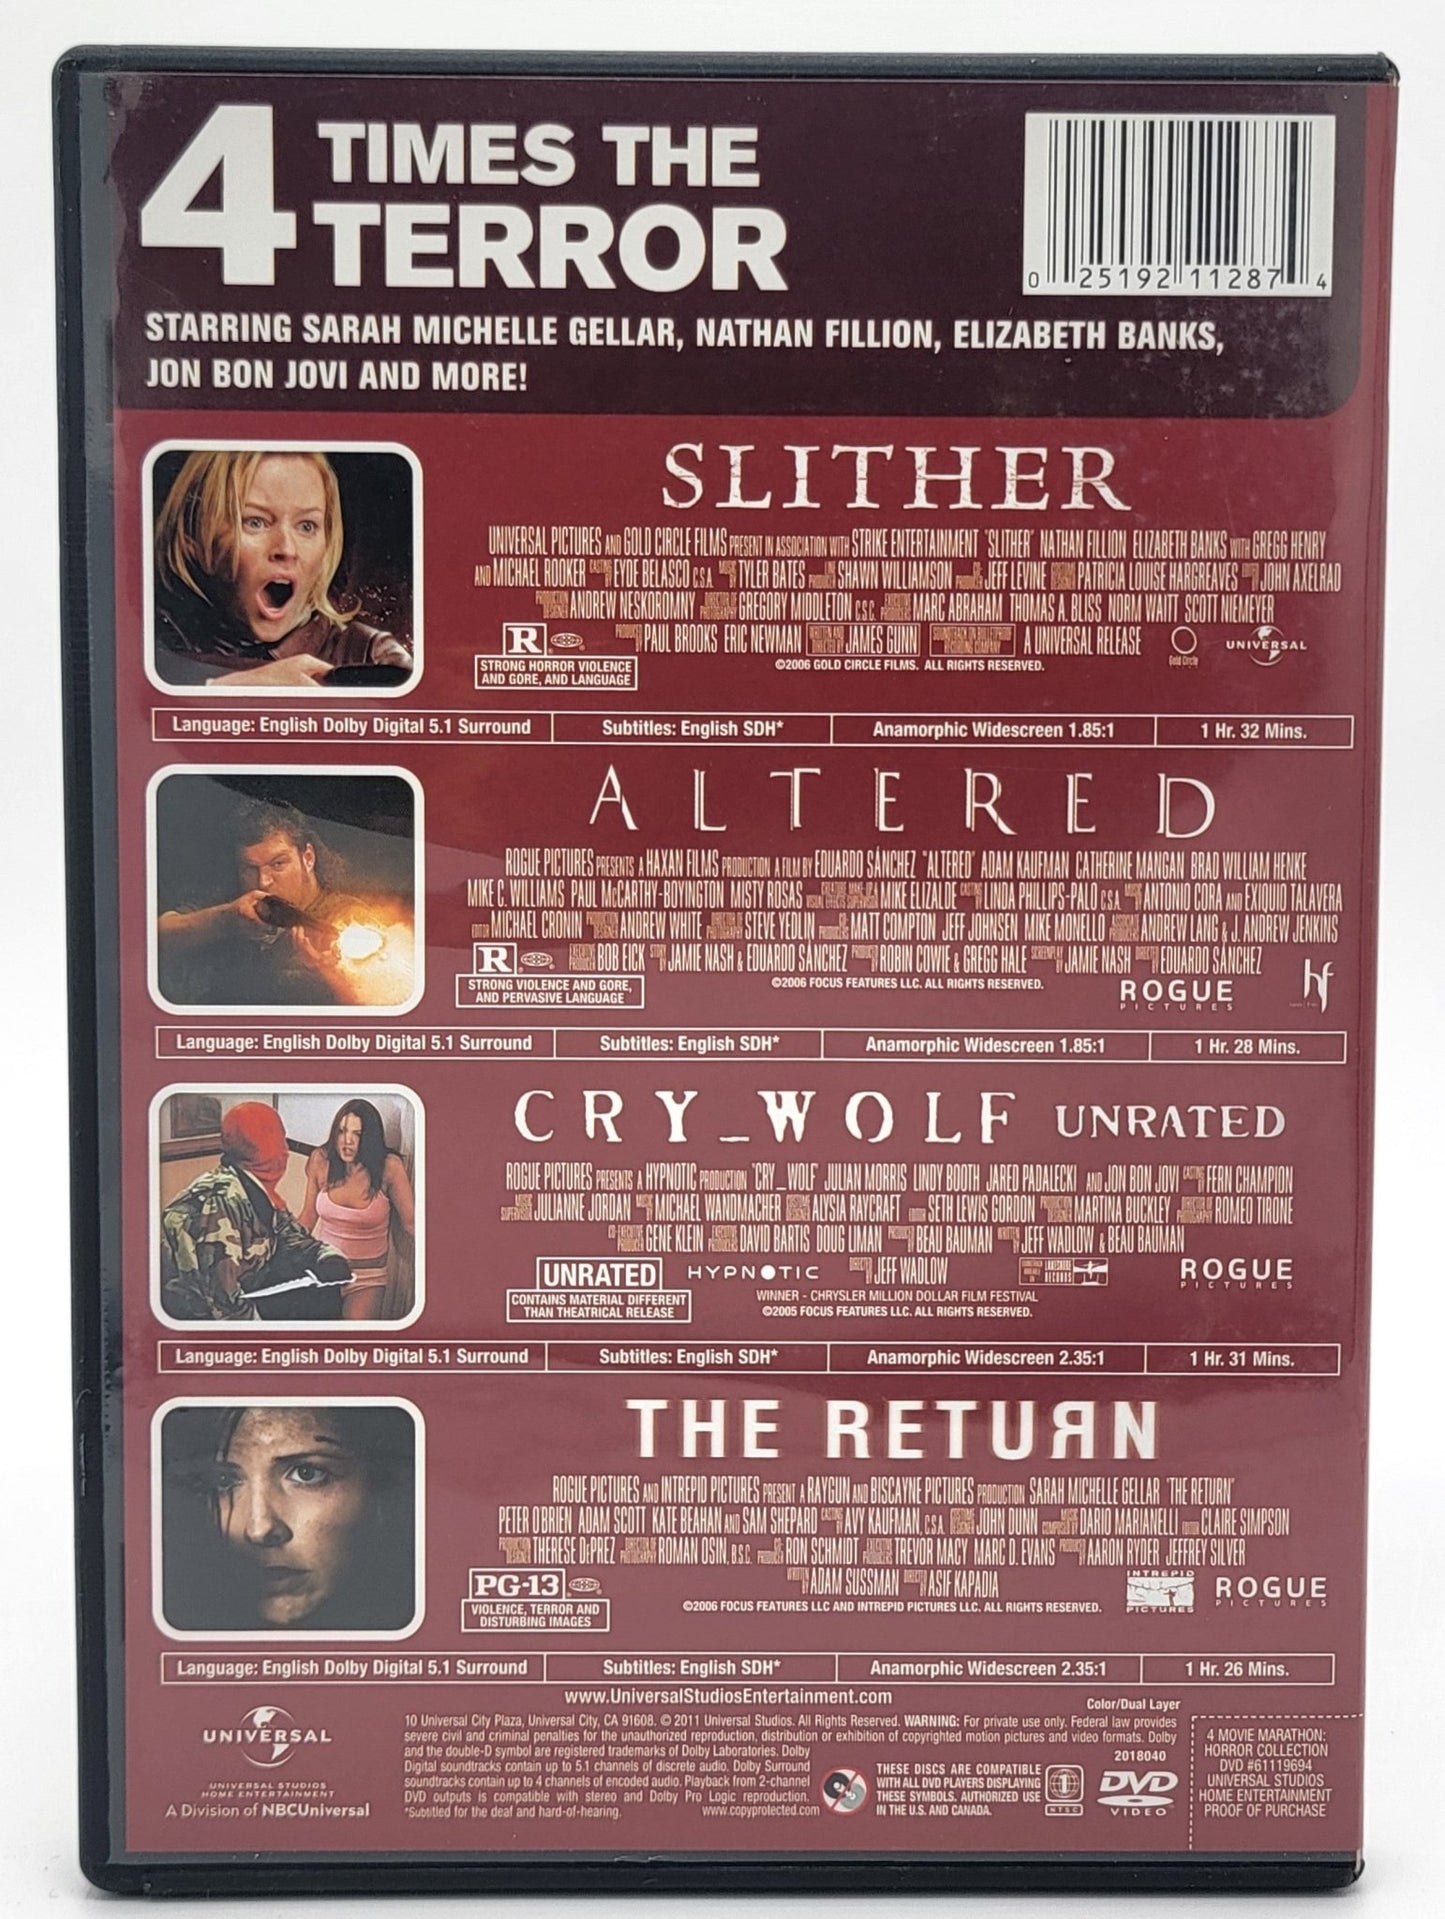 Universal Studios Home Entertainment - 4 Movie Marathon - Horror Collection | DVD -Unrated - DVD - Steady Bunny Shop